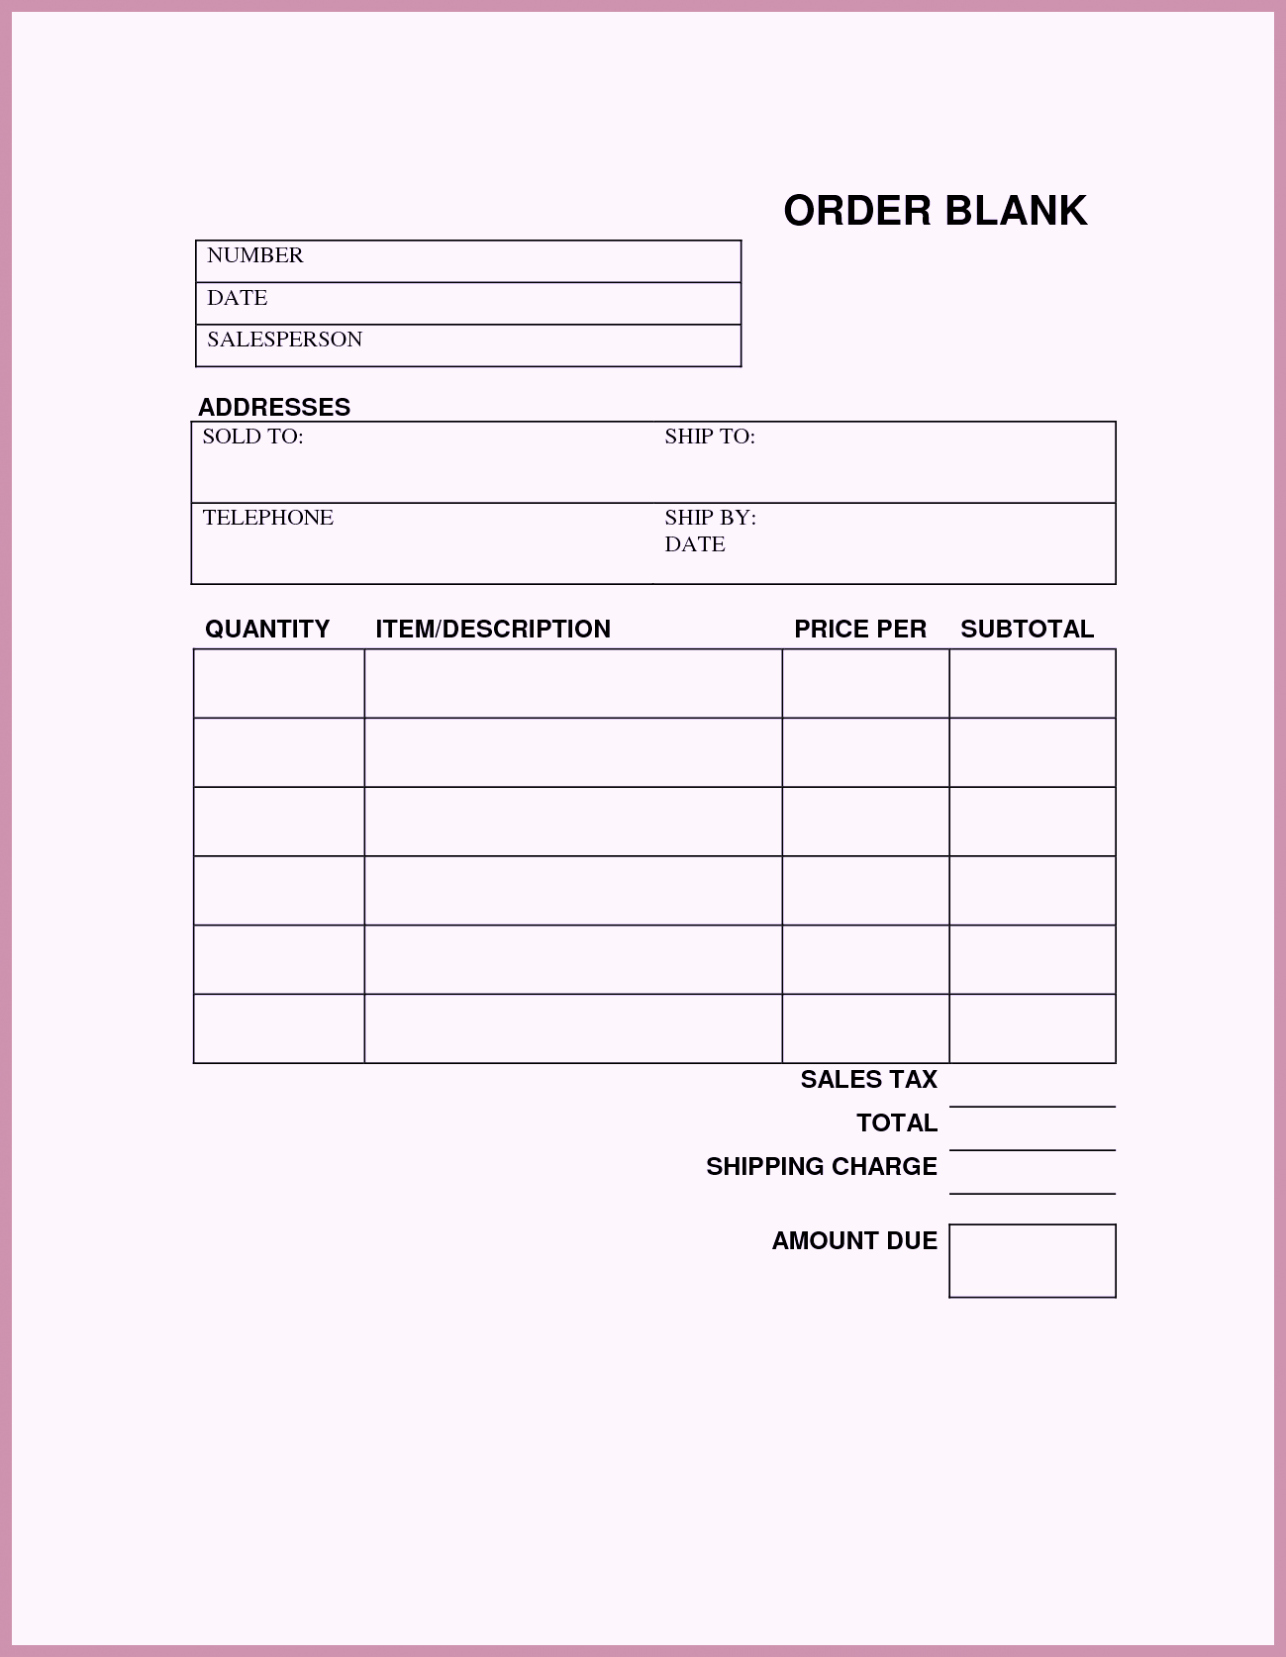 Purchase order Templates Word New Free Purchase order form Template Excel Word Sample